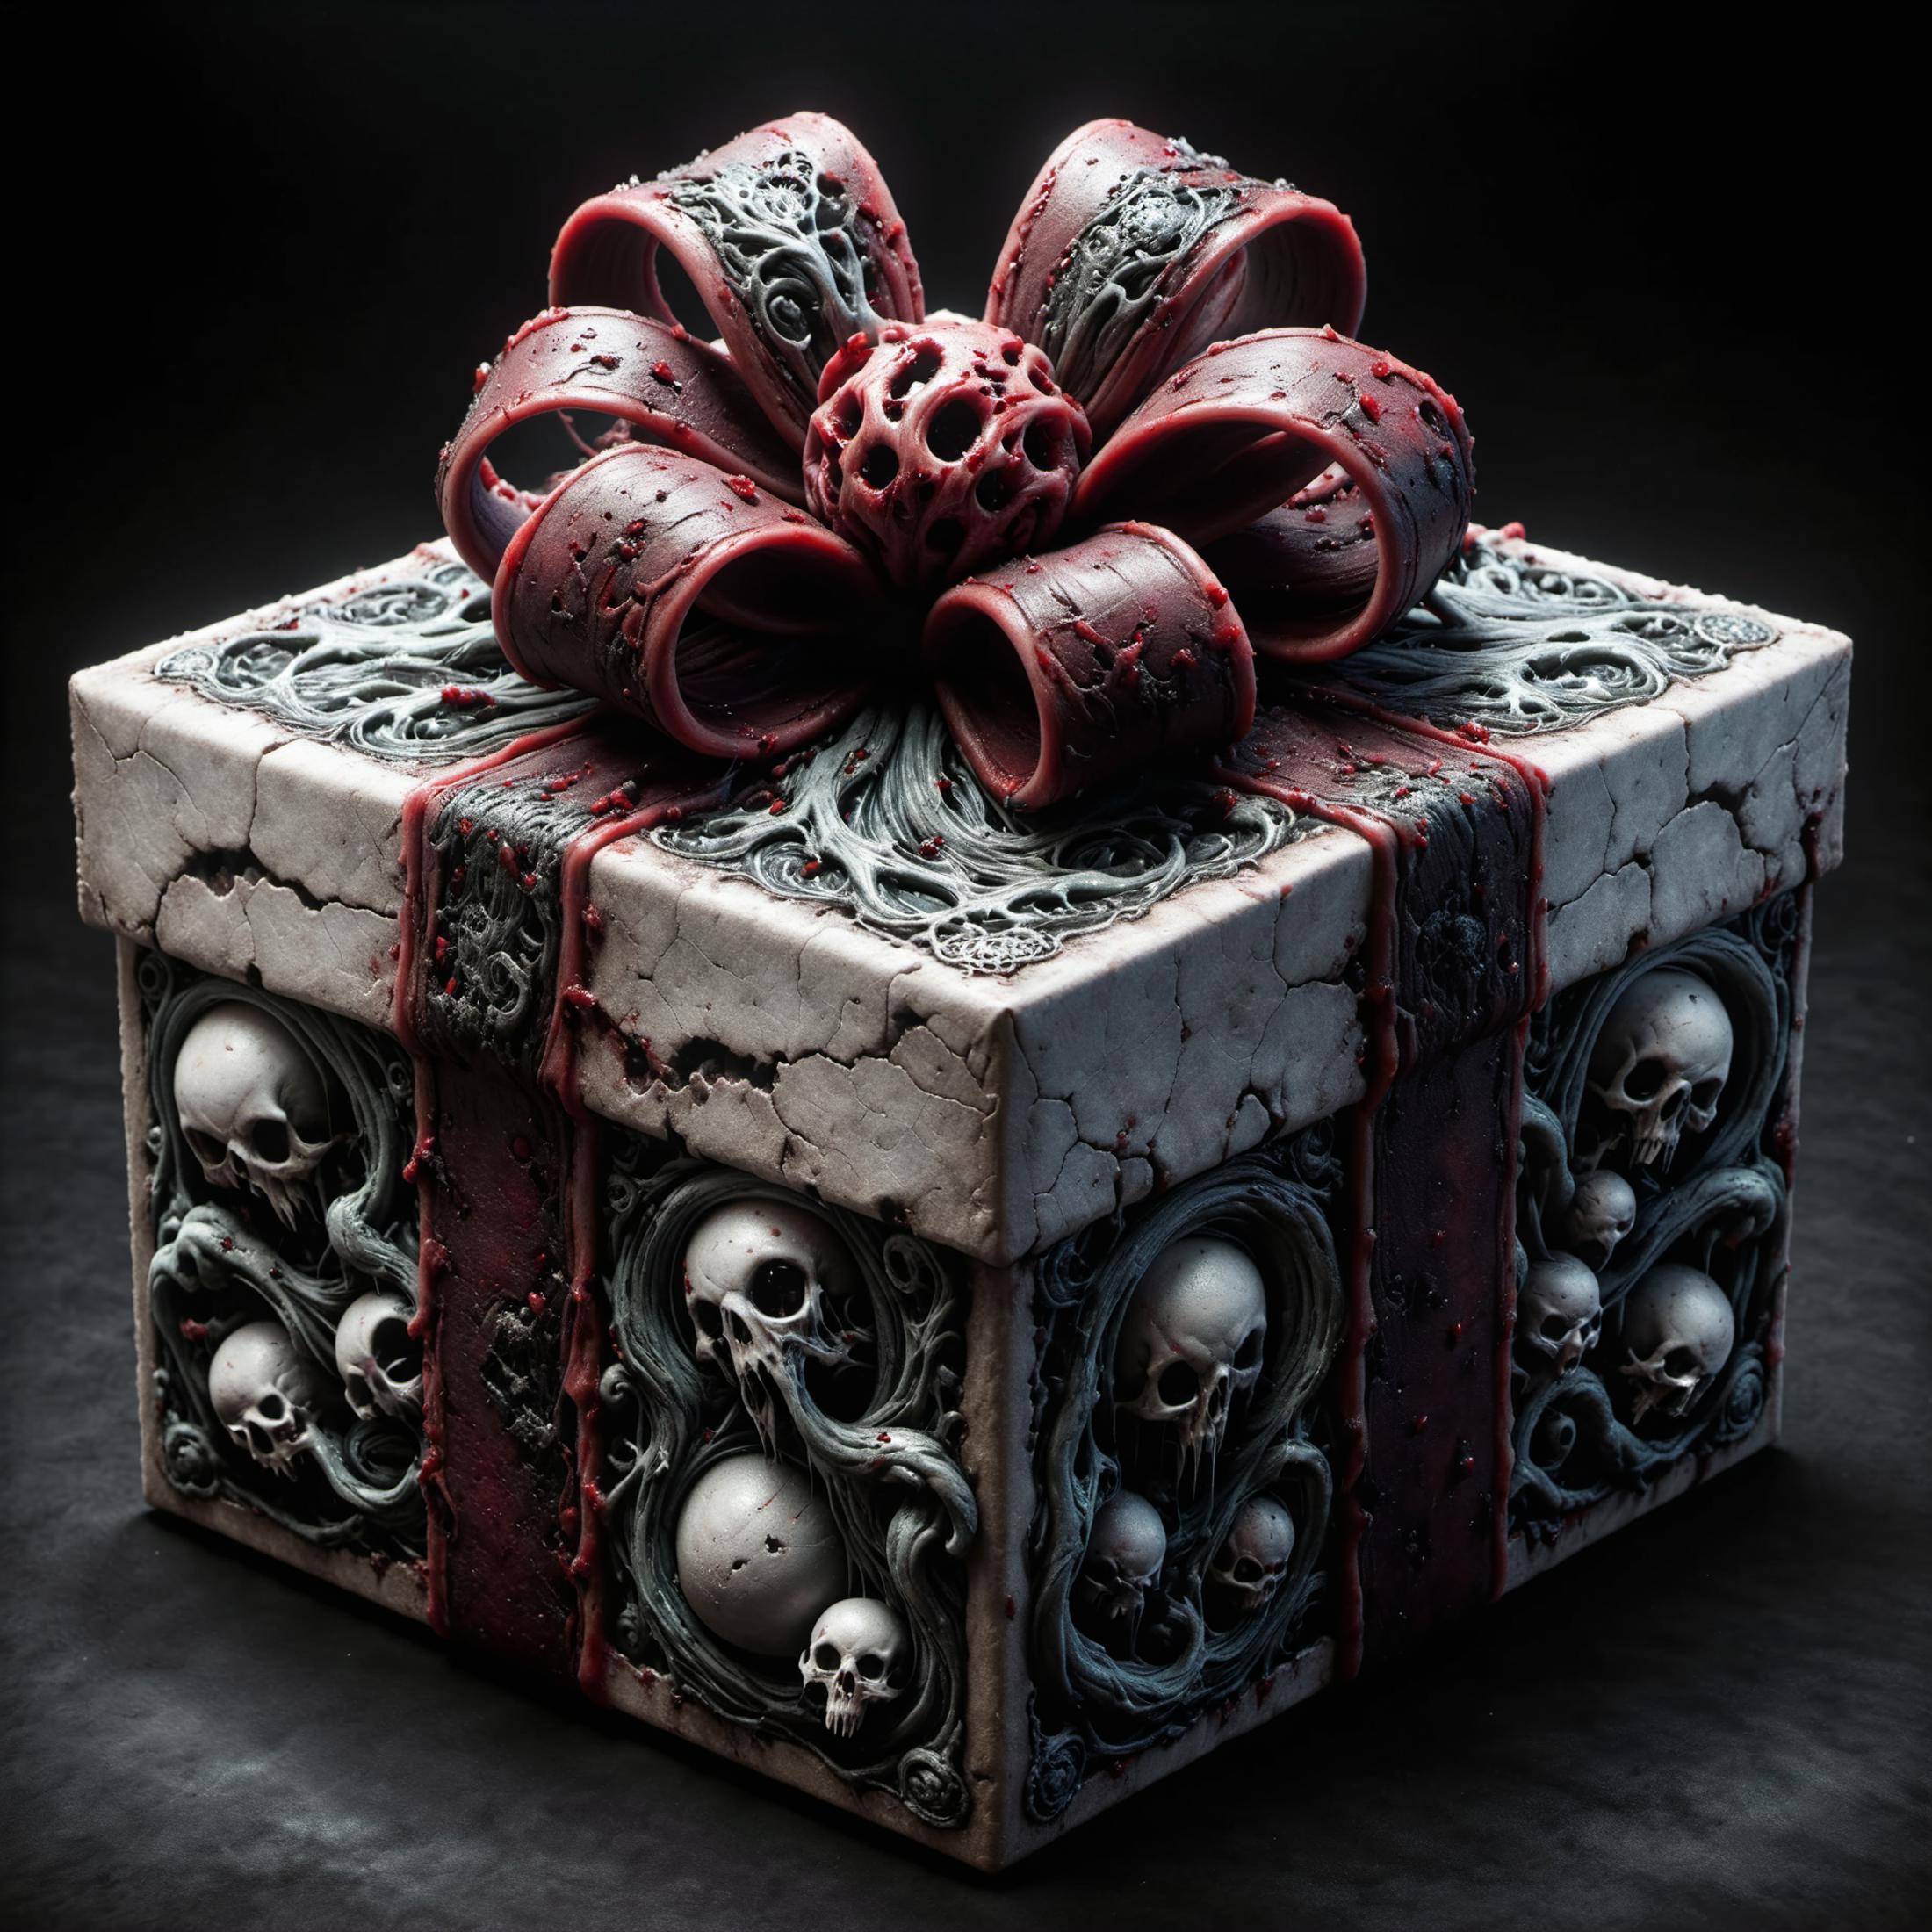 A skull and bones gift box with a bow.